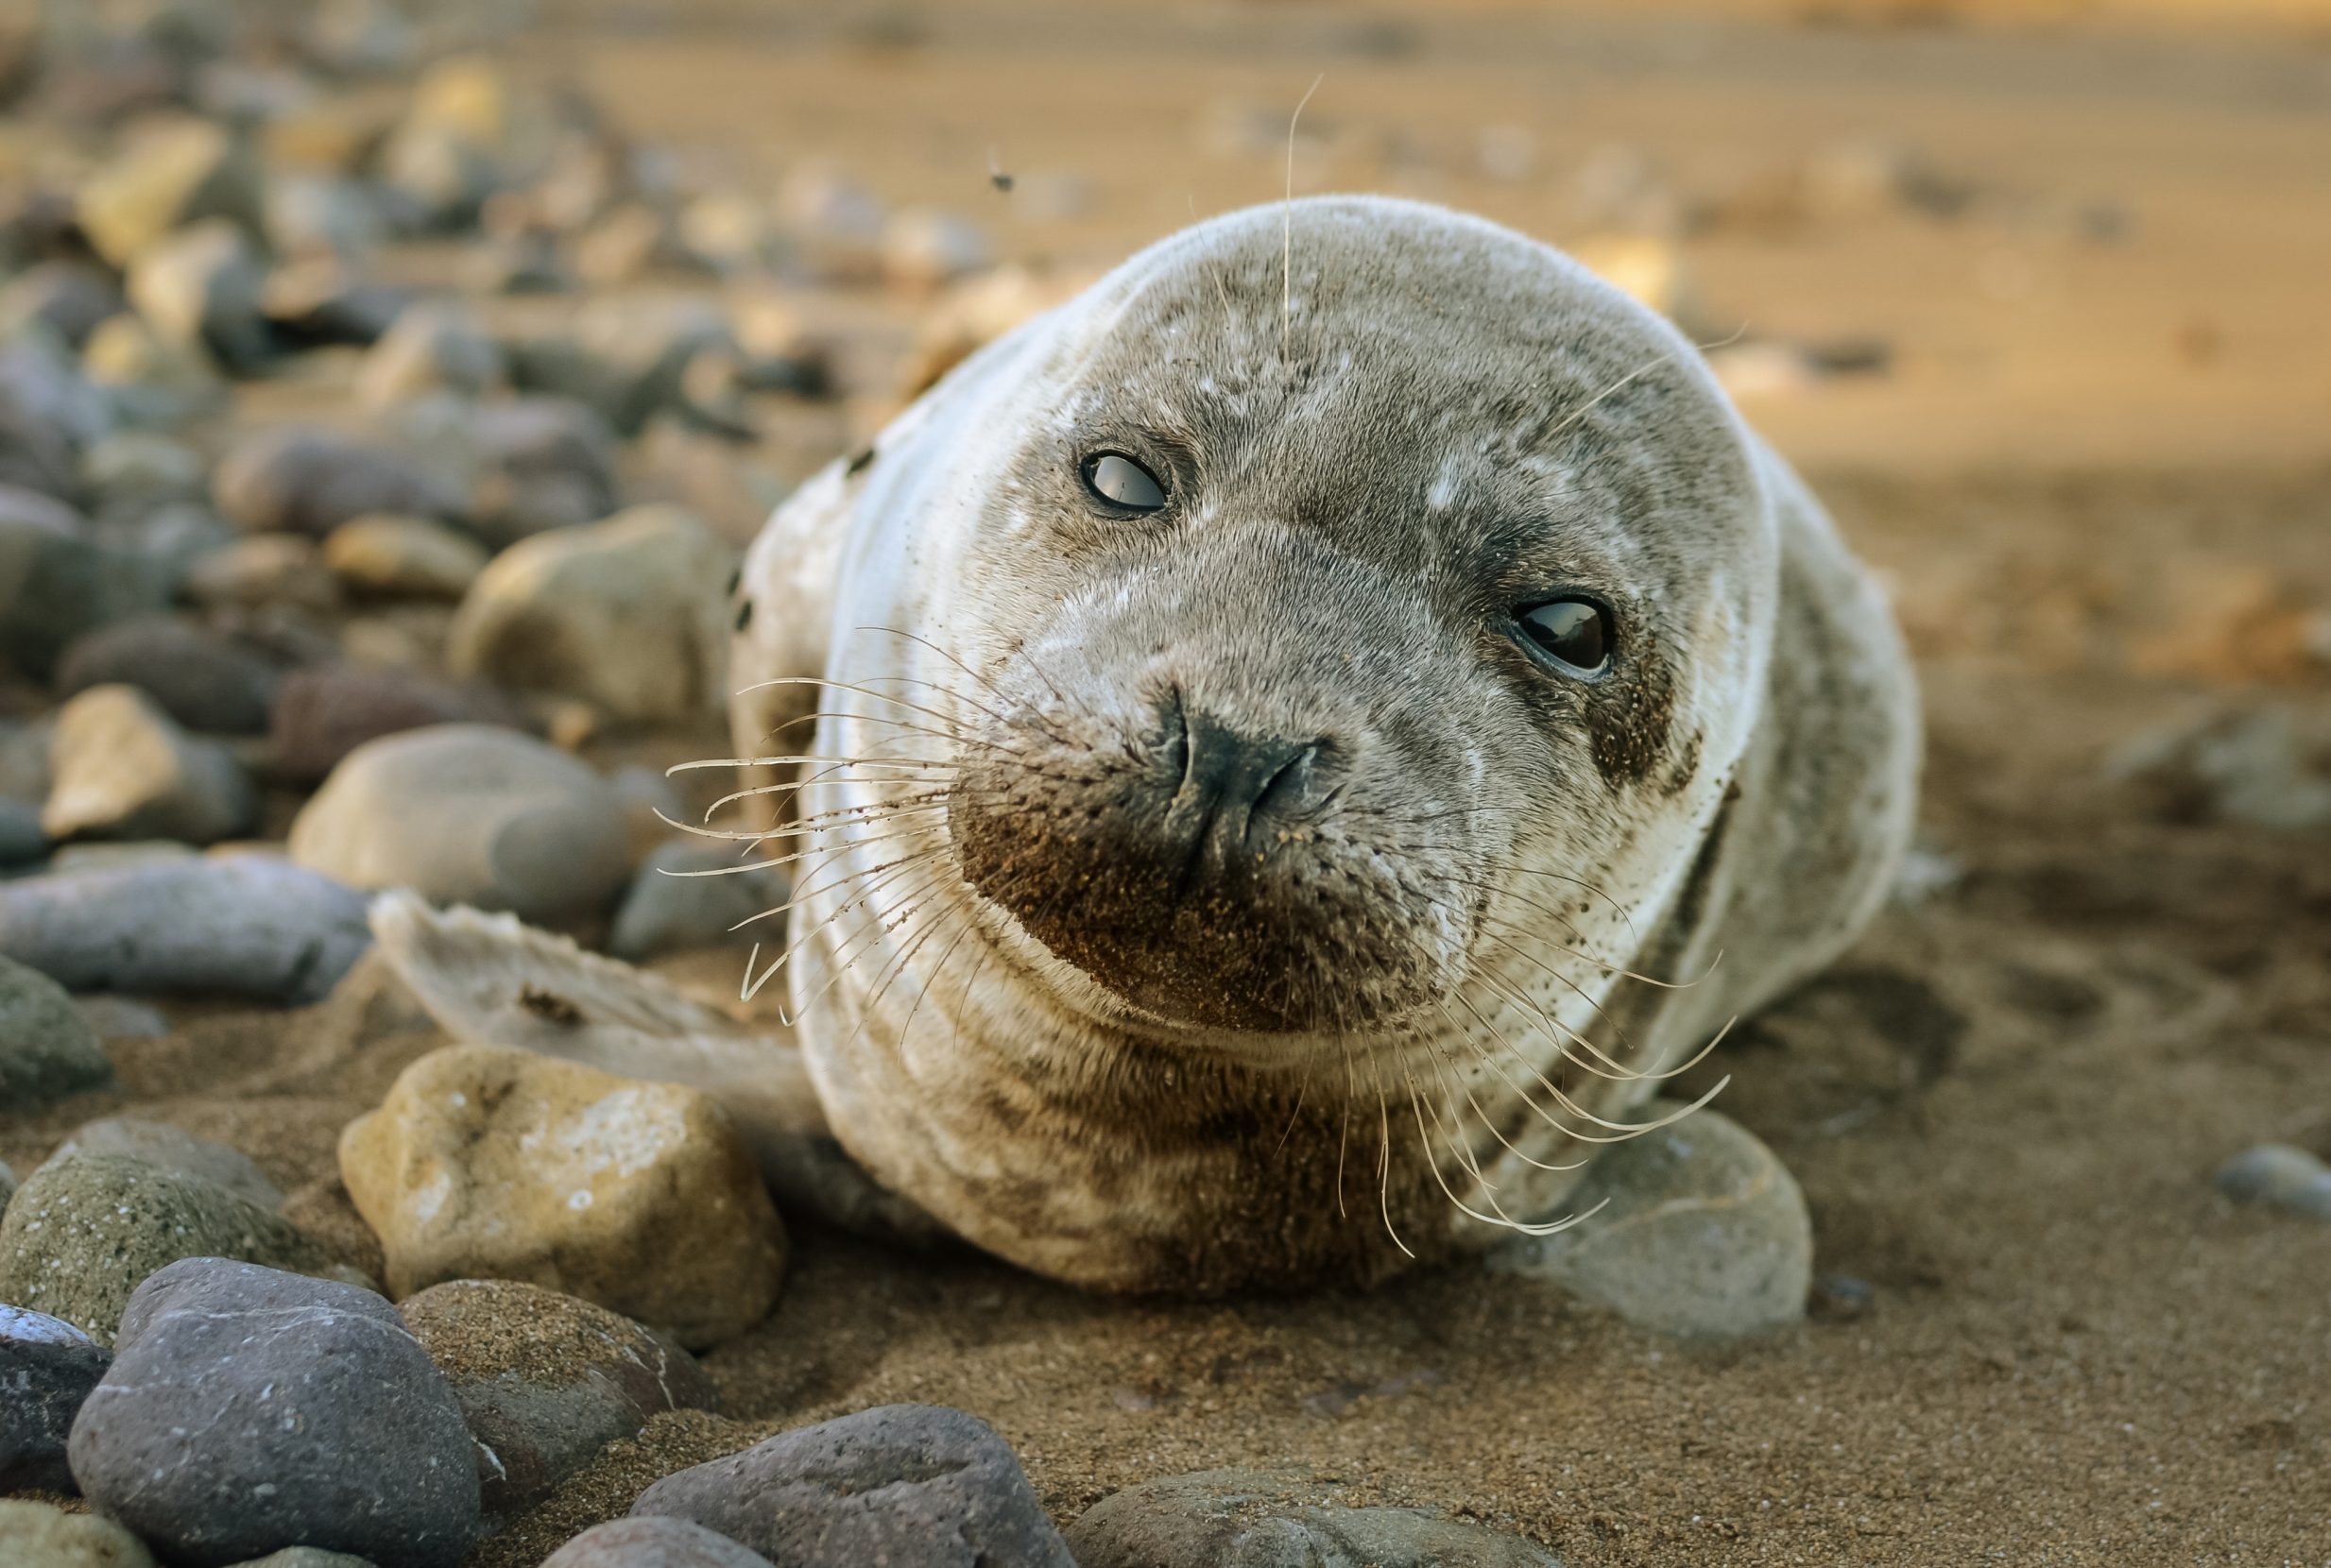 A harbor seal pup rests on the shore of Catalina Island in the Channel Island archipelago. Photo: Alex Krowiak.